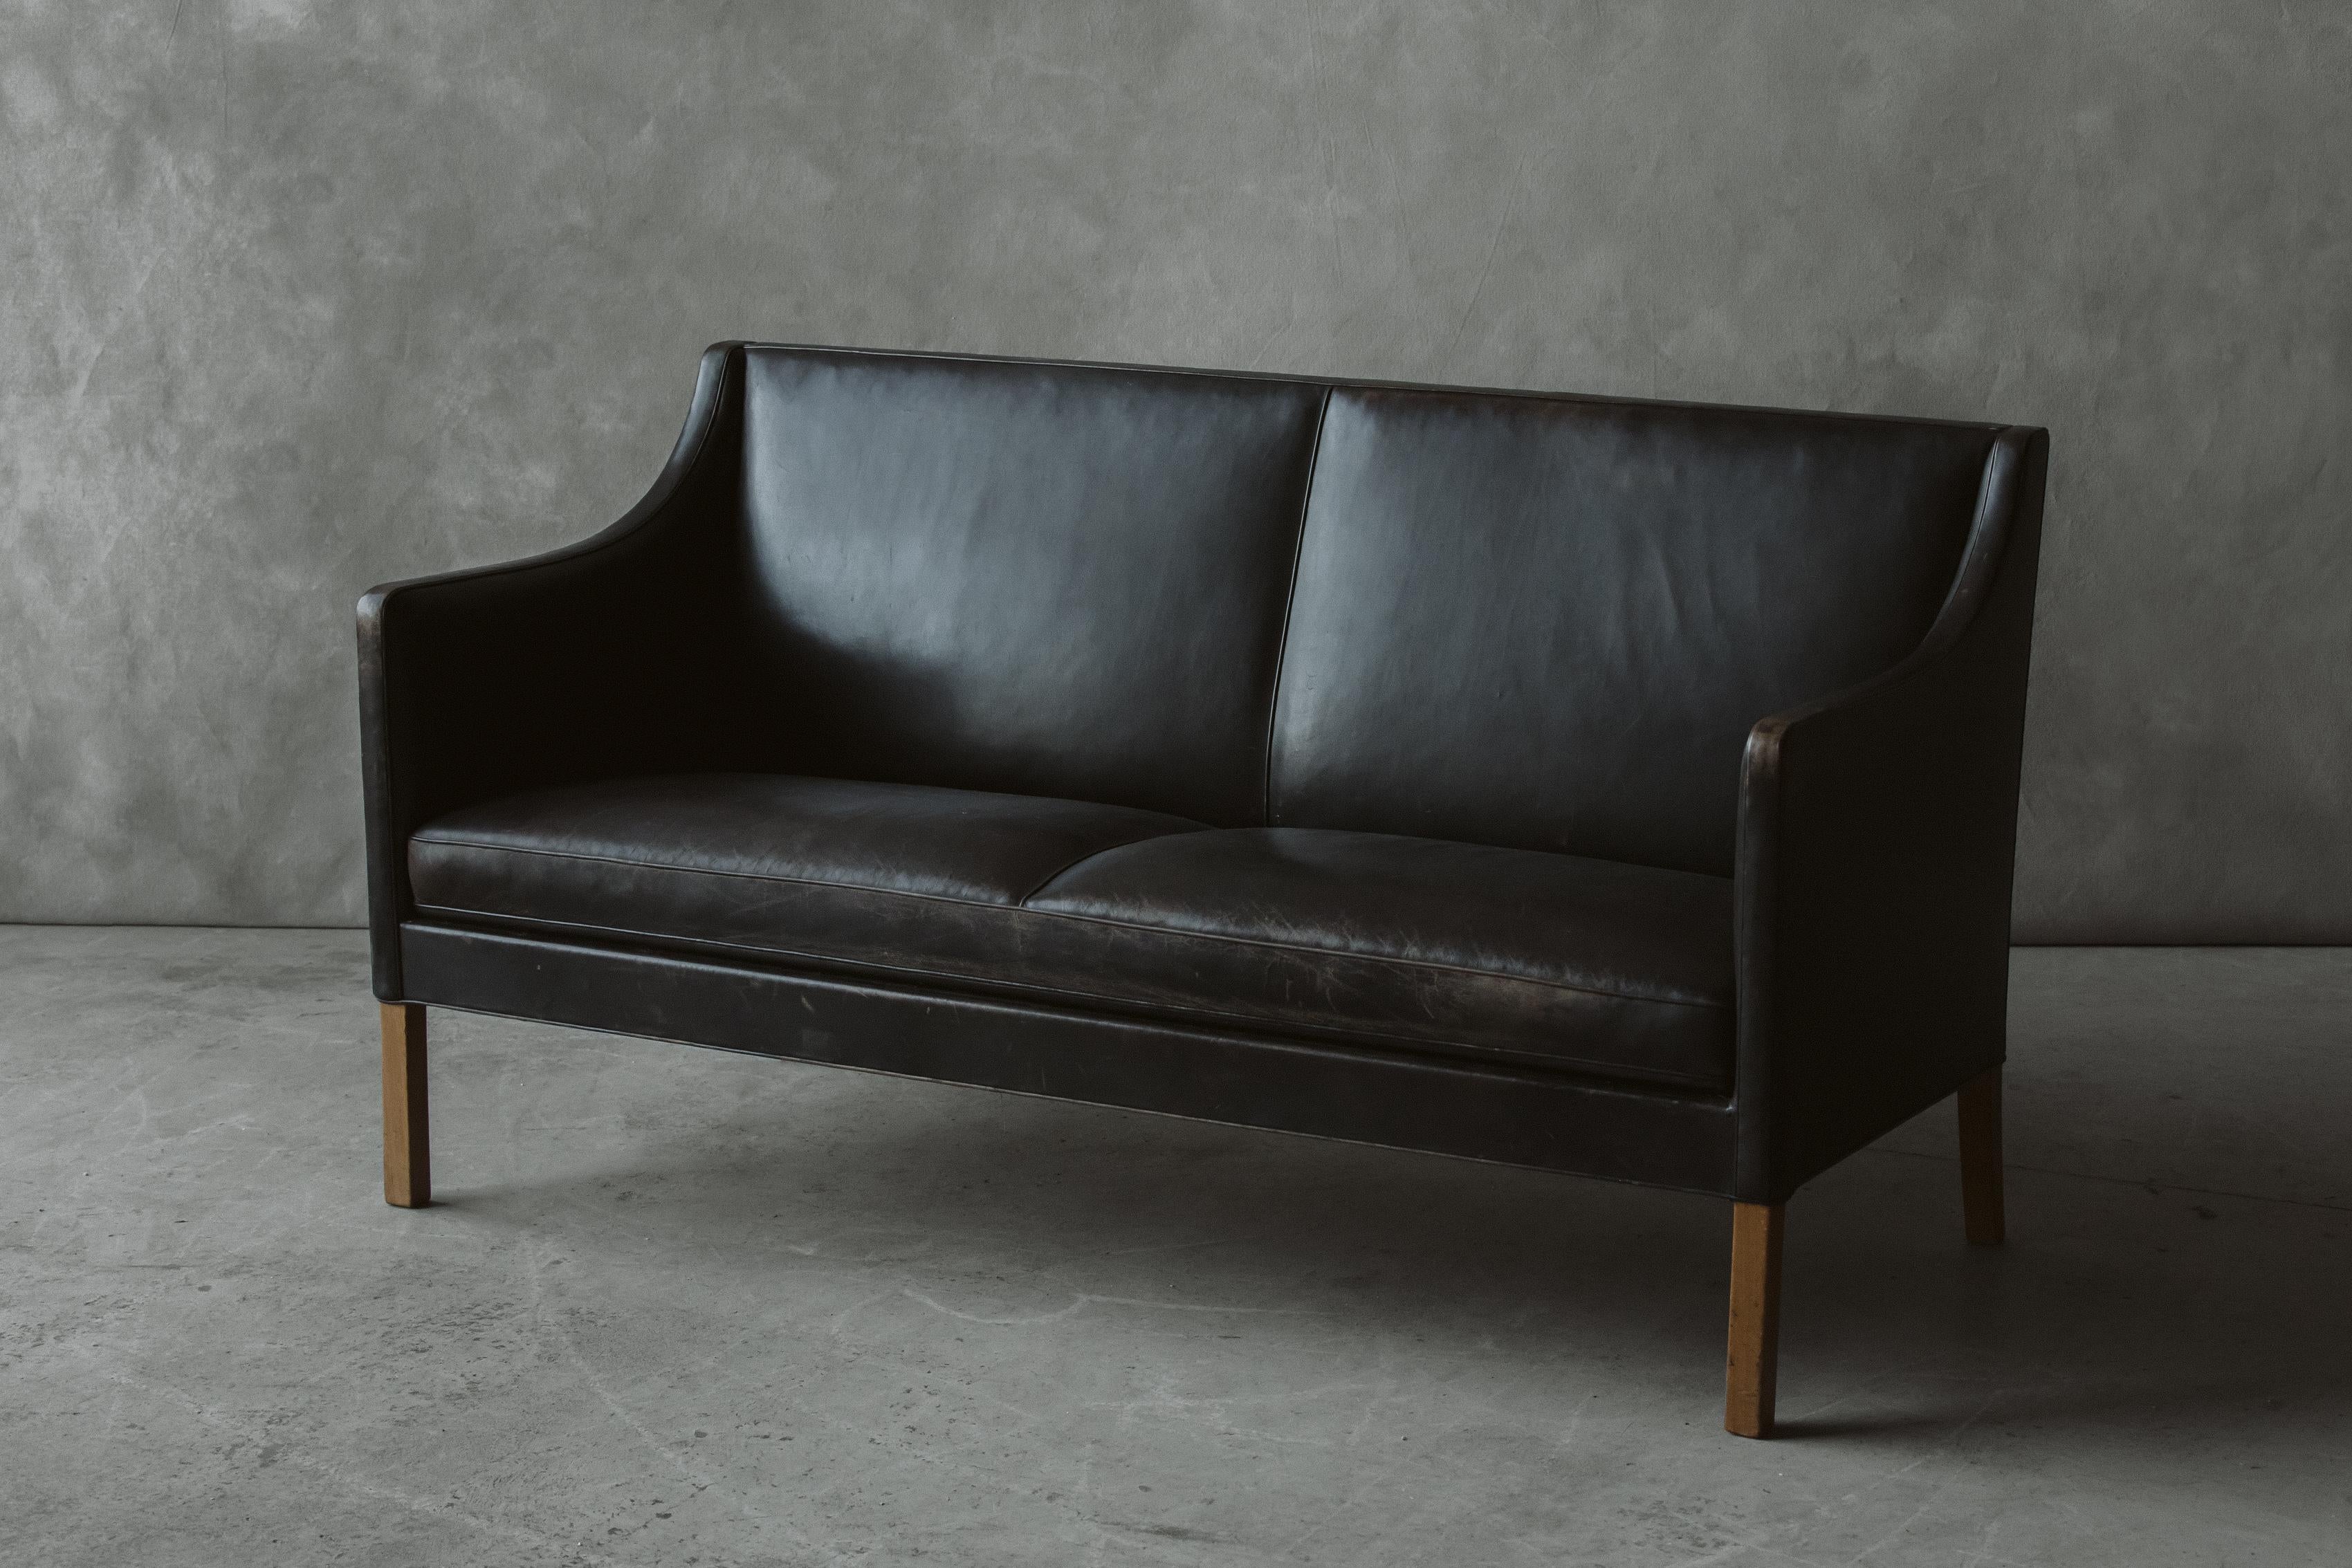 Vintage leather cabinetmaker sofa From Denmark, circa 1950. Original black leather upholstery with great wear and patina. 

We prefer to speak directly with our clients. So, If you have any questions or would like to know more please give us a